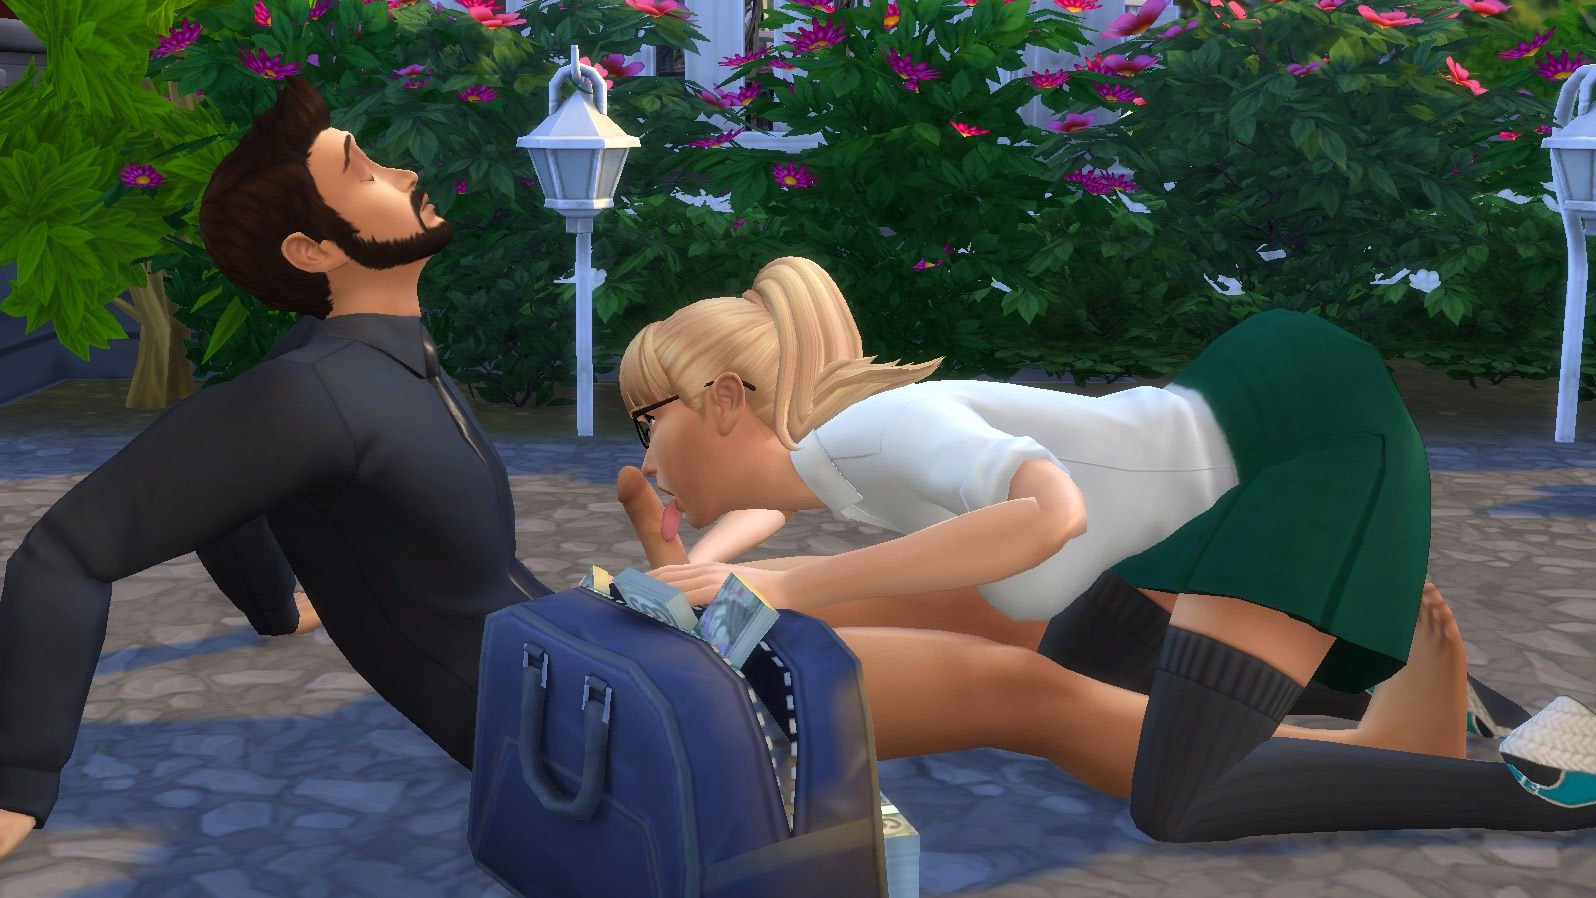 Wicked whims sims 4 animations threesome